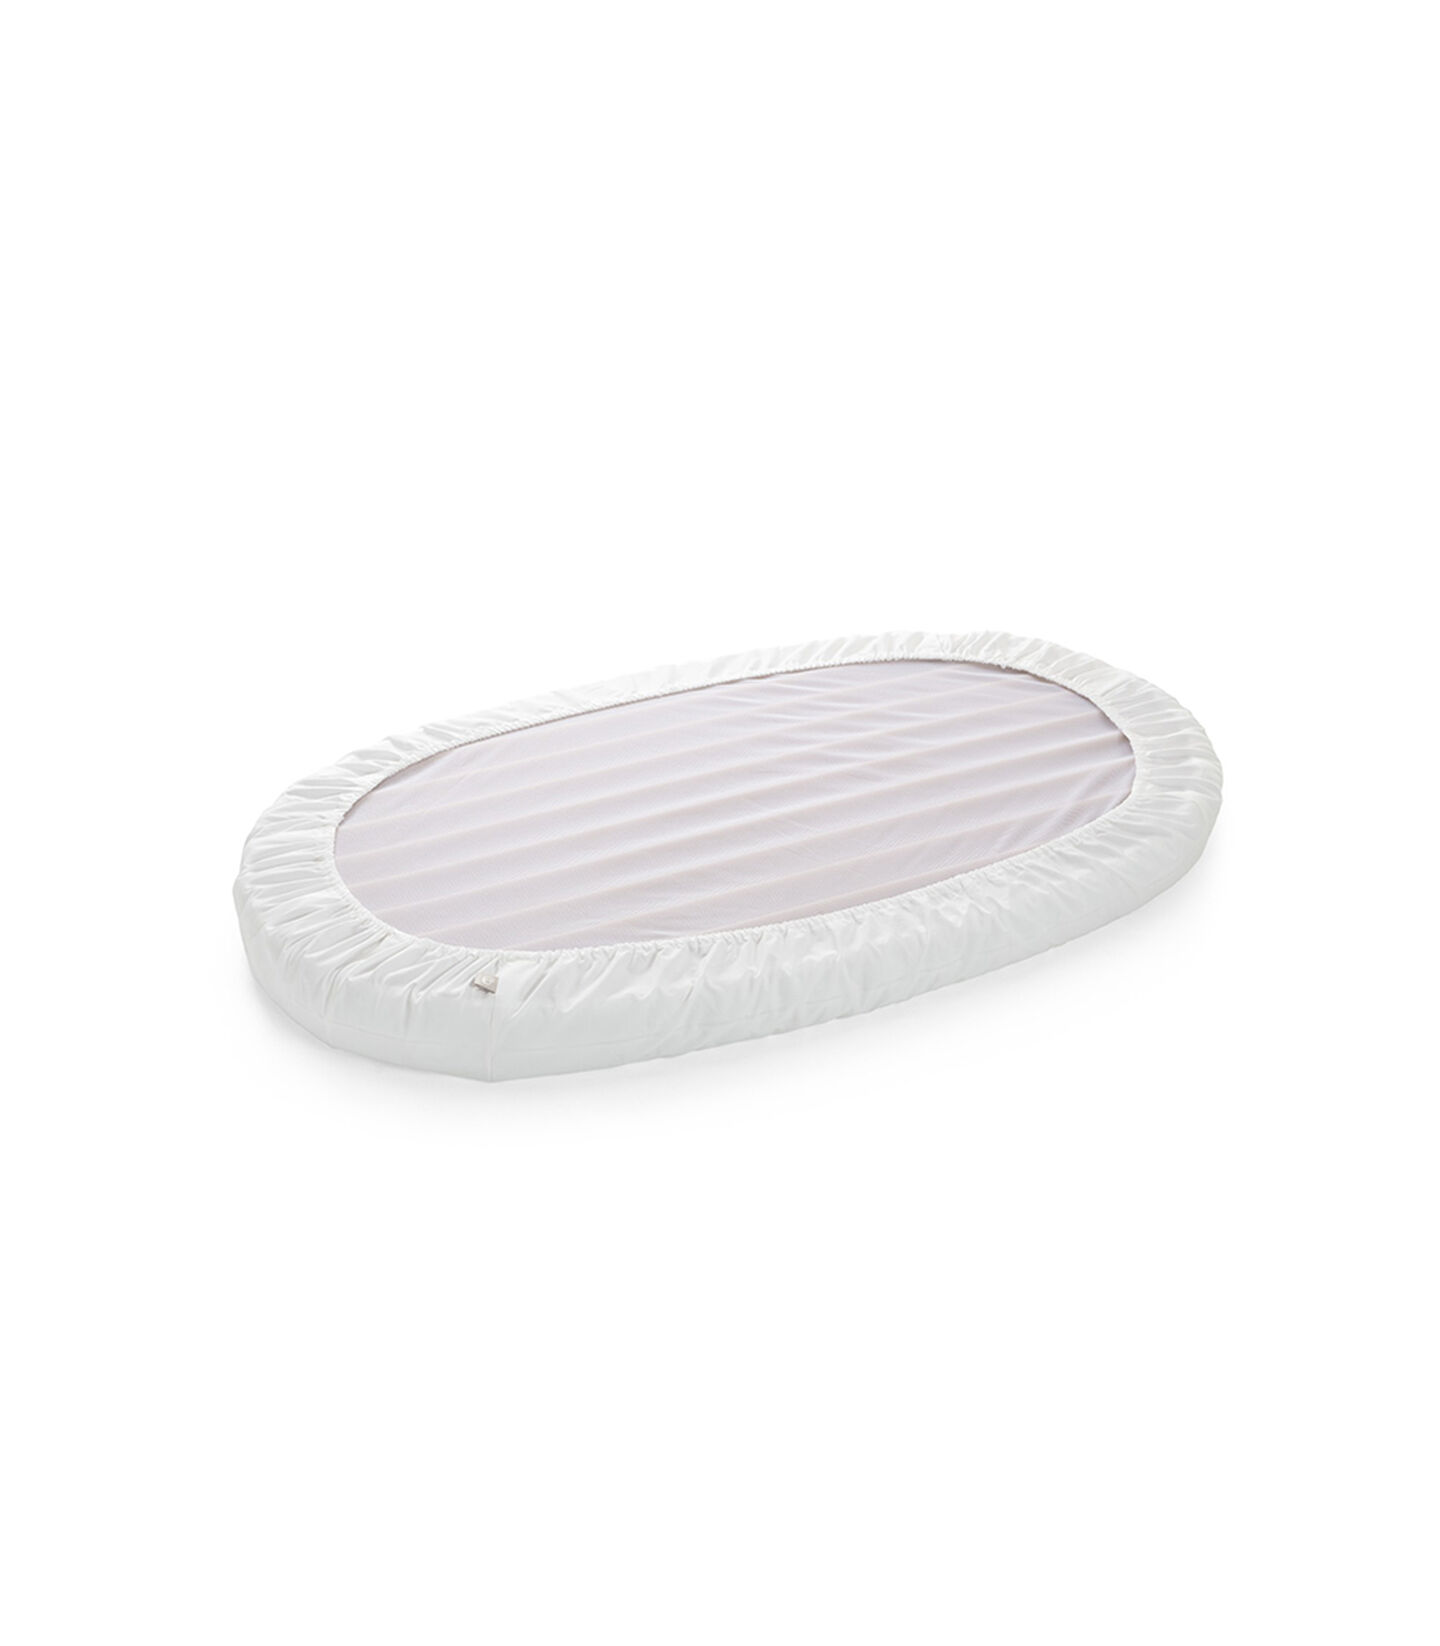 Stokke® Sleepi™ Fitted Sheet Белый, Белый, mainview view 2